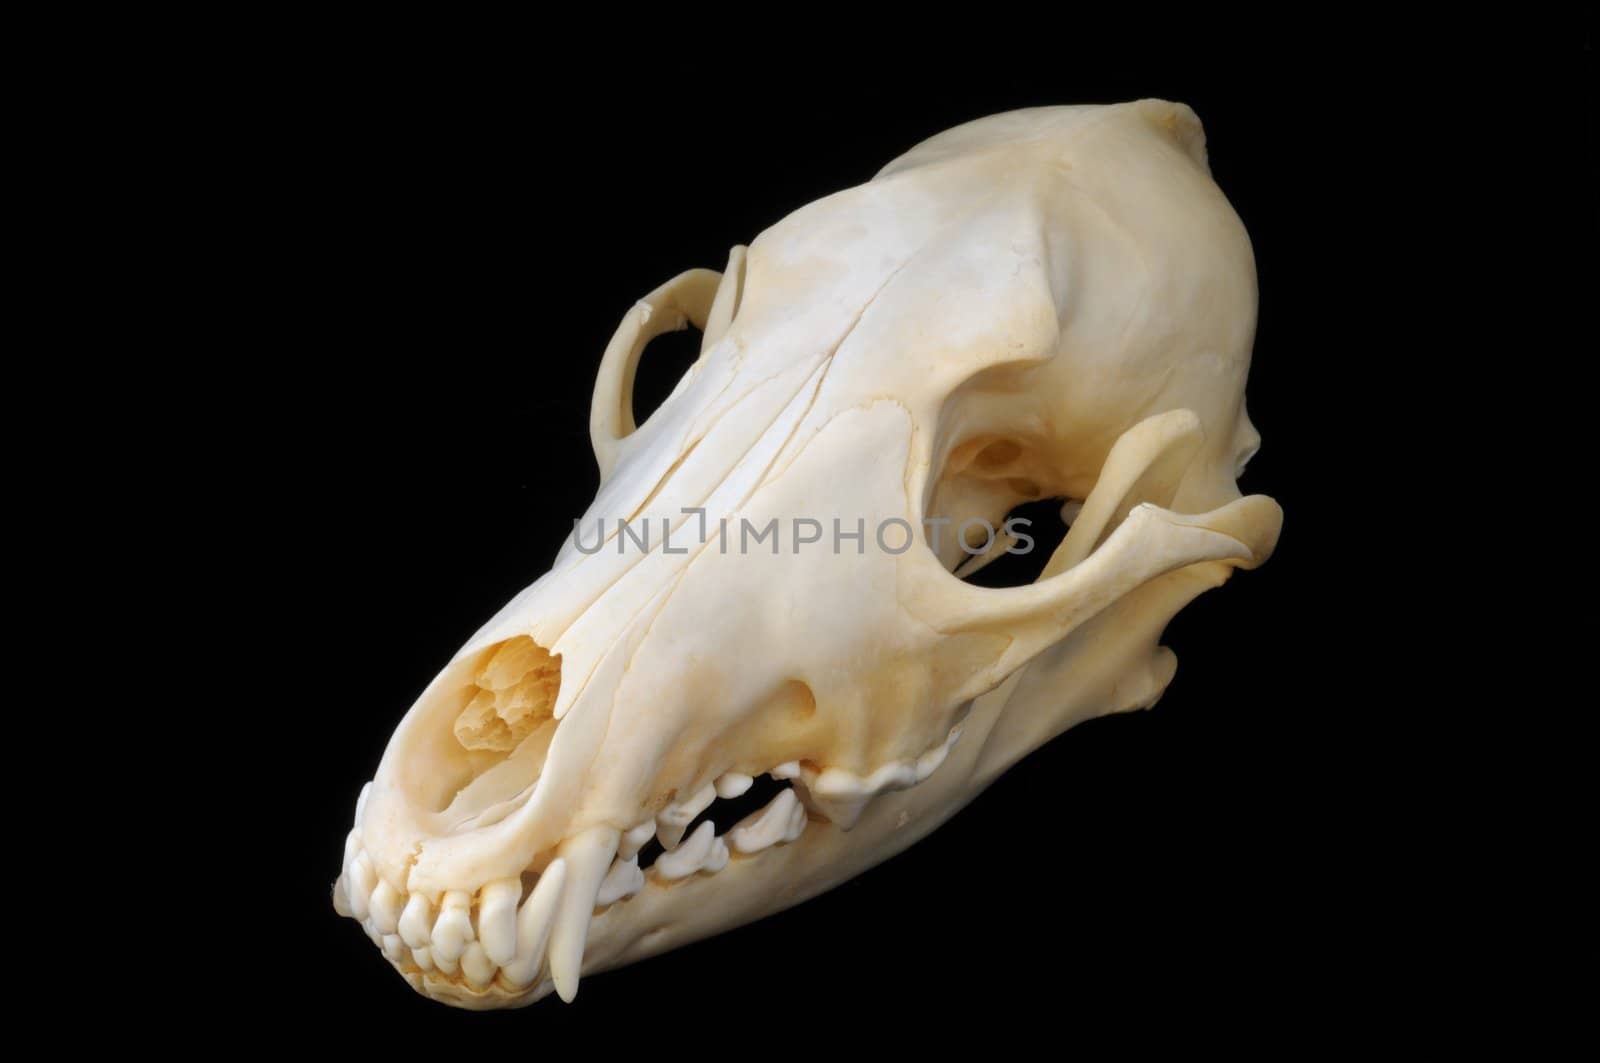 A three-quarters view of a real coyote skull on a black background, with sharp teeth and finely detailed skeletal structure.